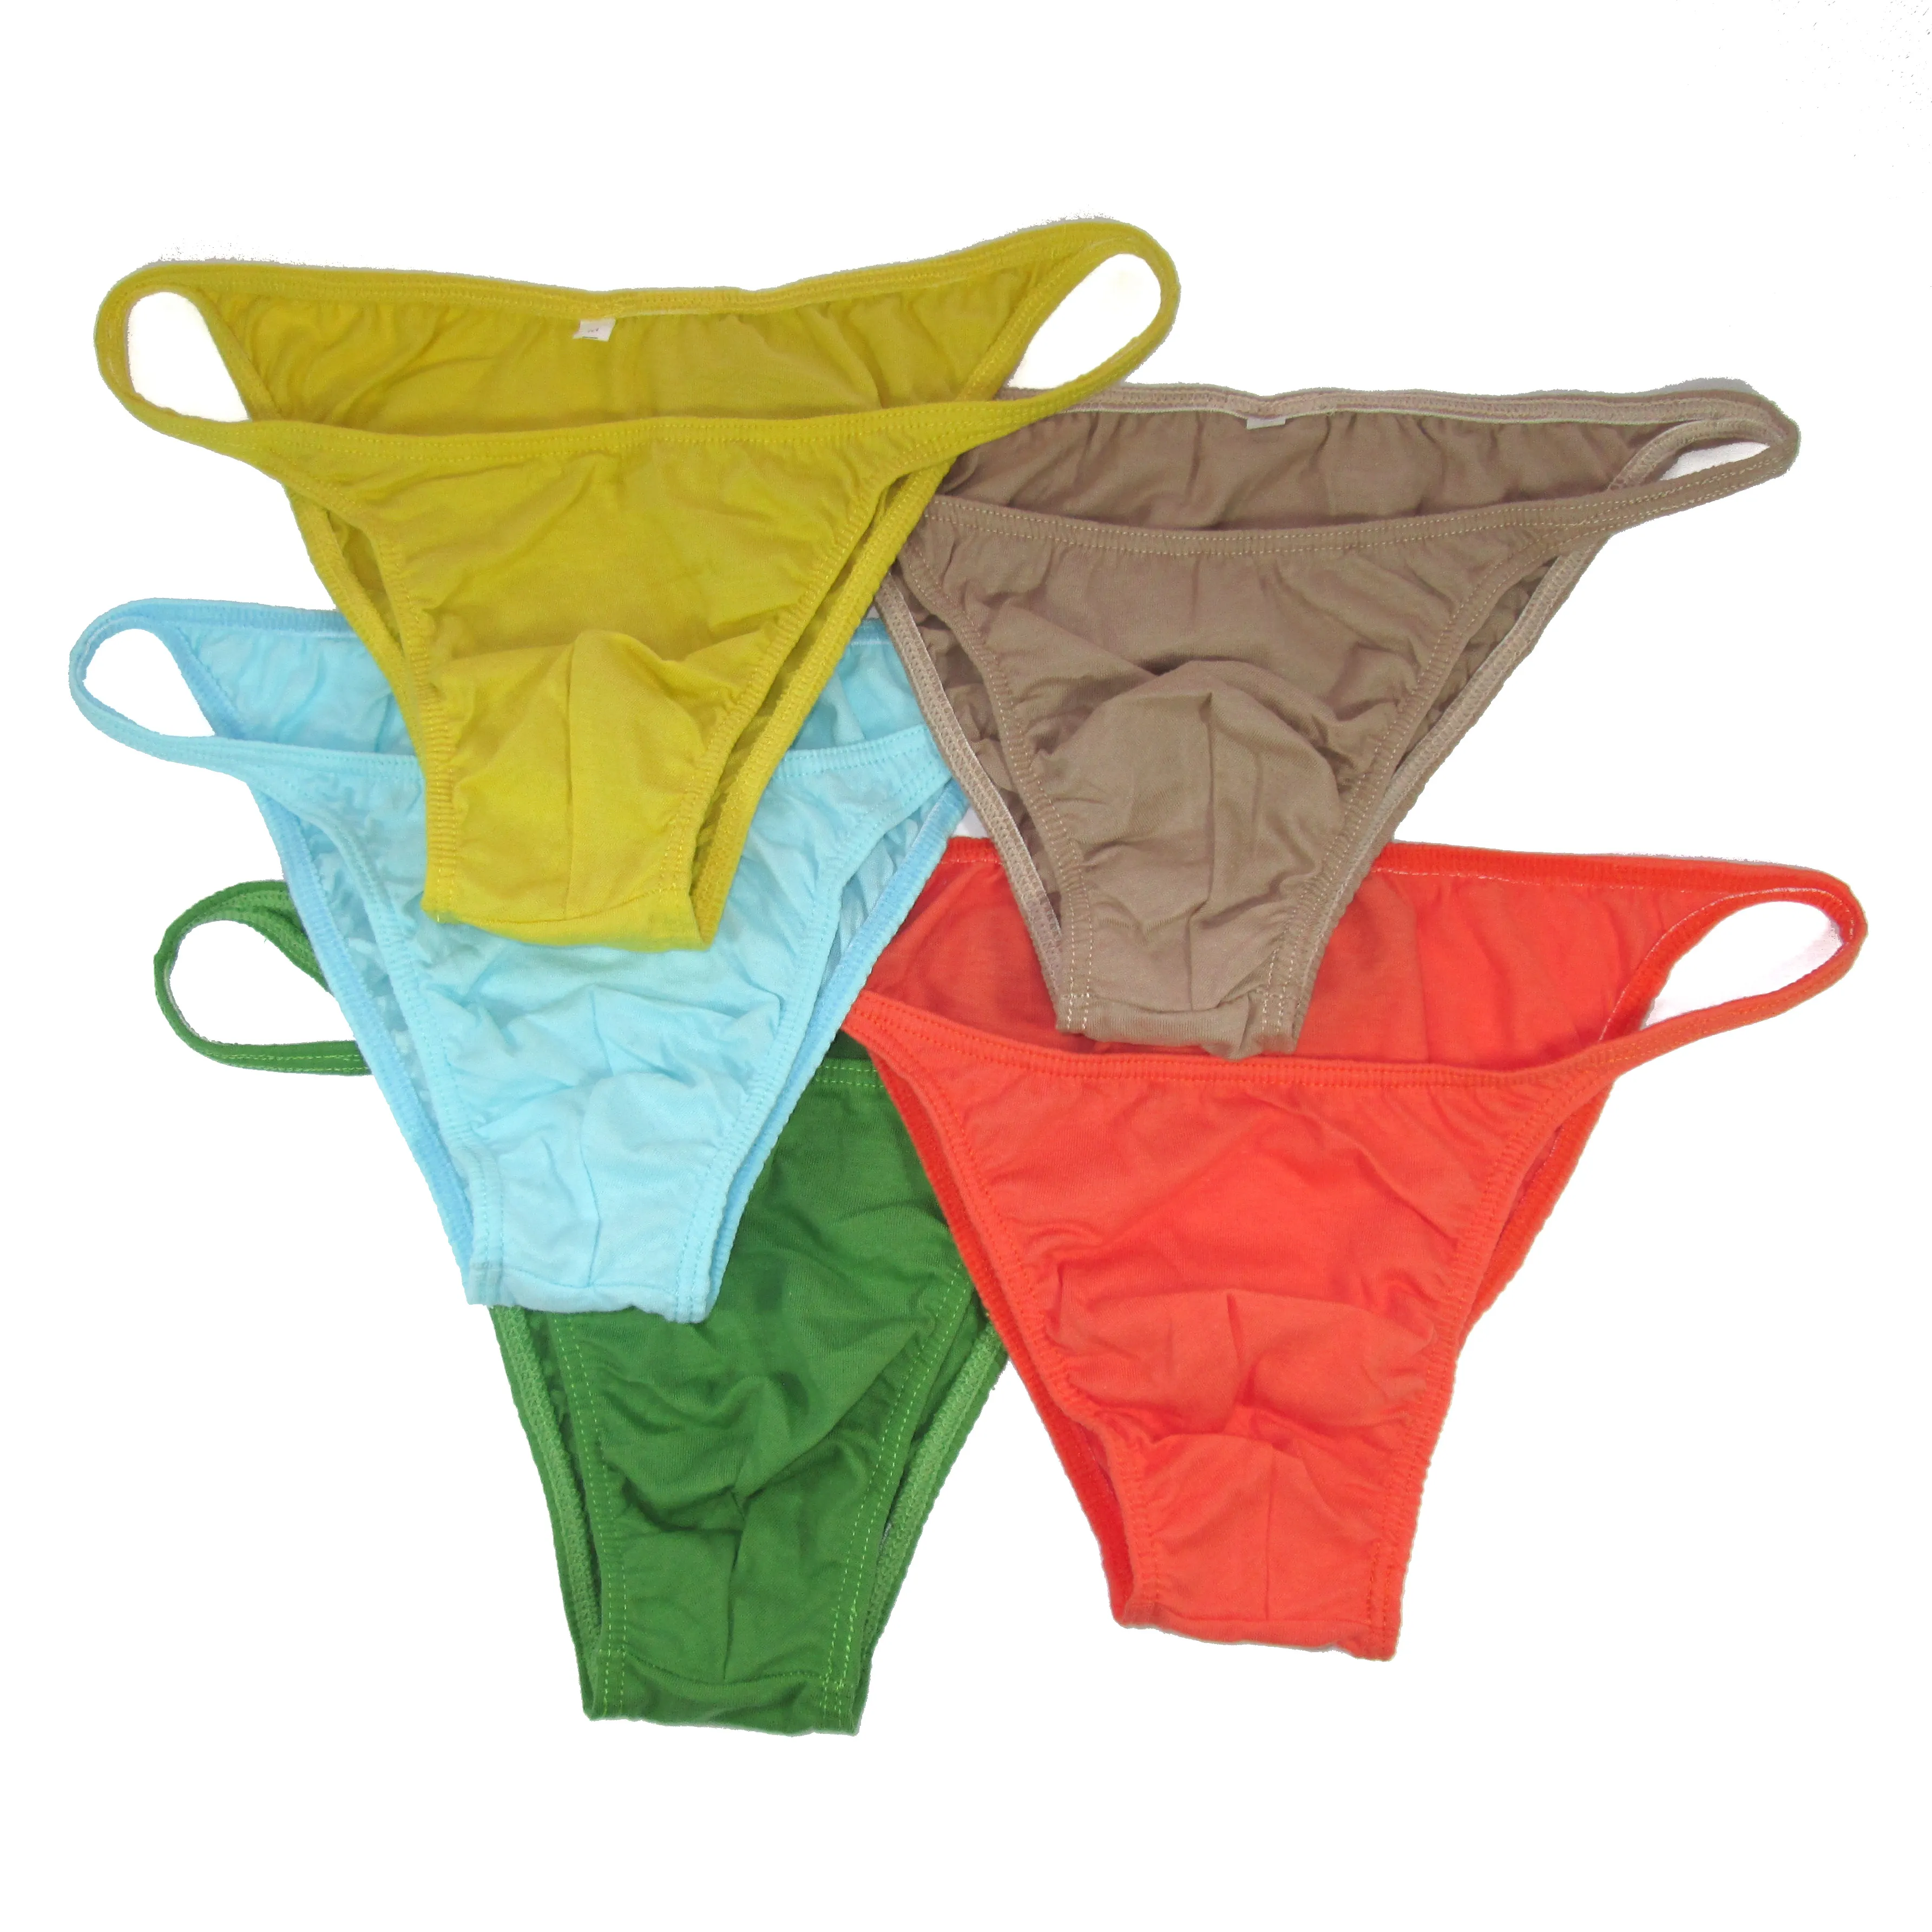 Mens Cotton String Bikini Underwear With Front Pouch, Comfortable